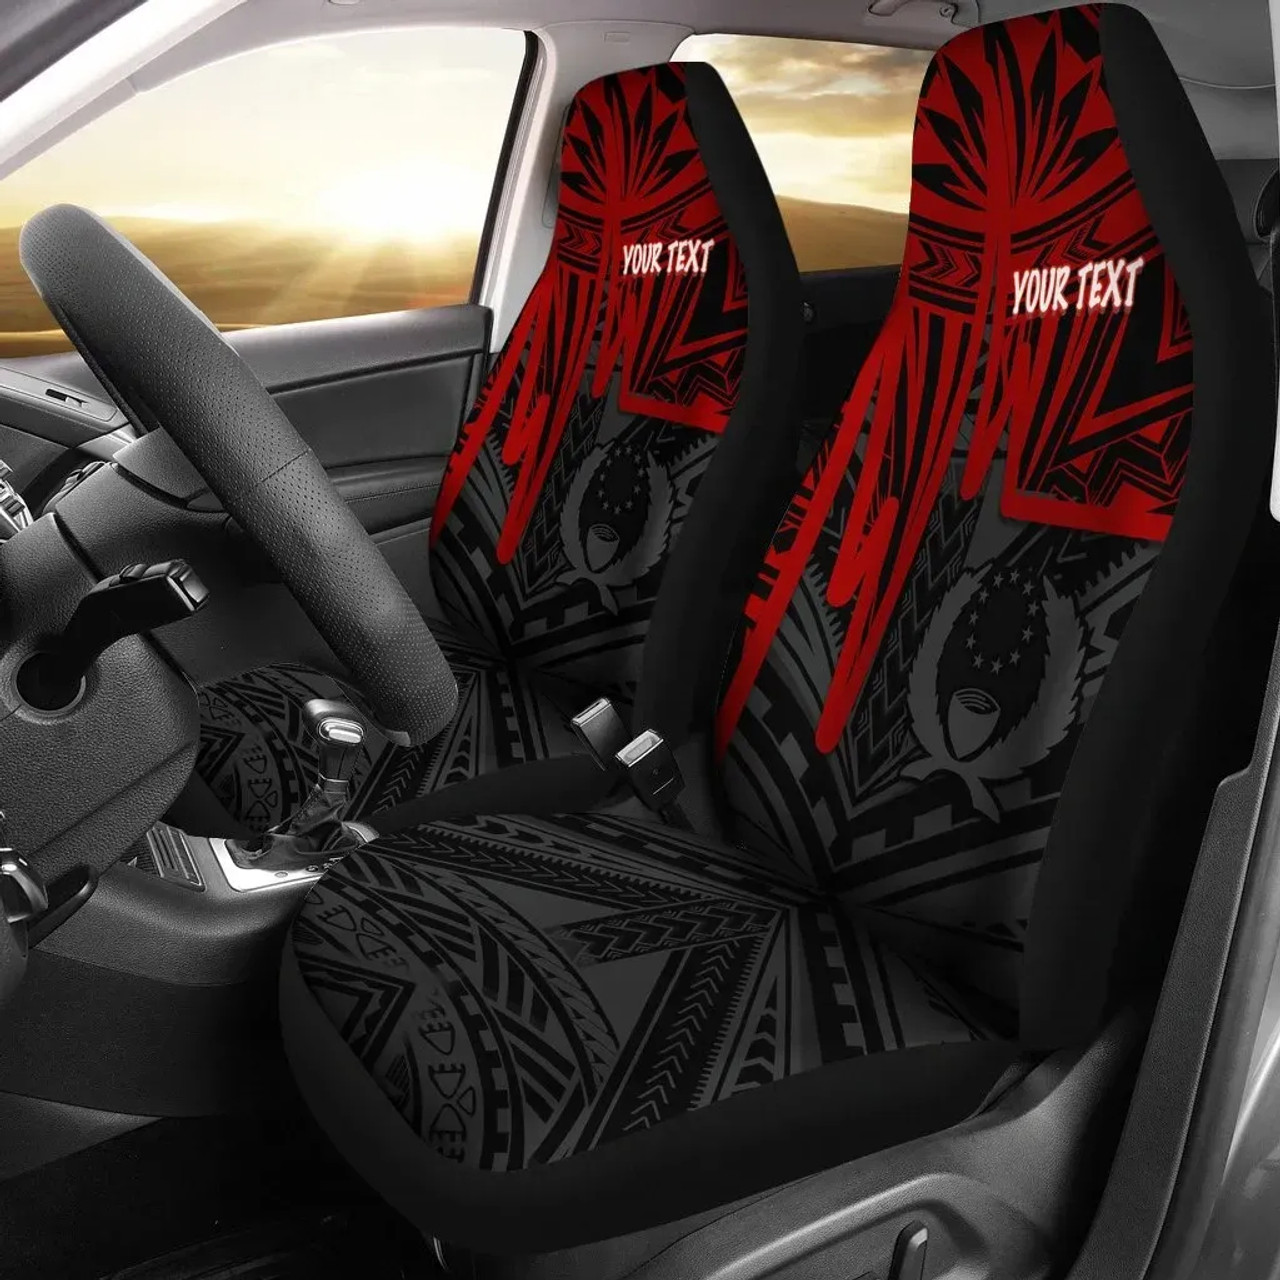 Pohnpei Personalised Car Seat Covers - Pohnpei Seal In Heartbeat Patterns Style (Red)